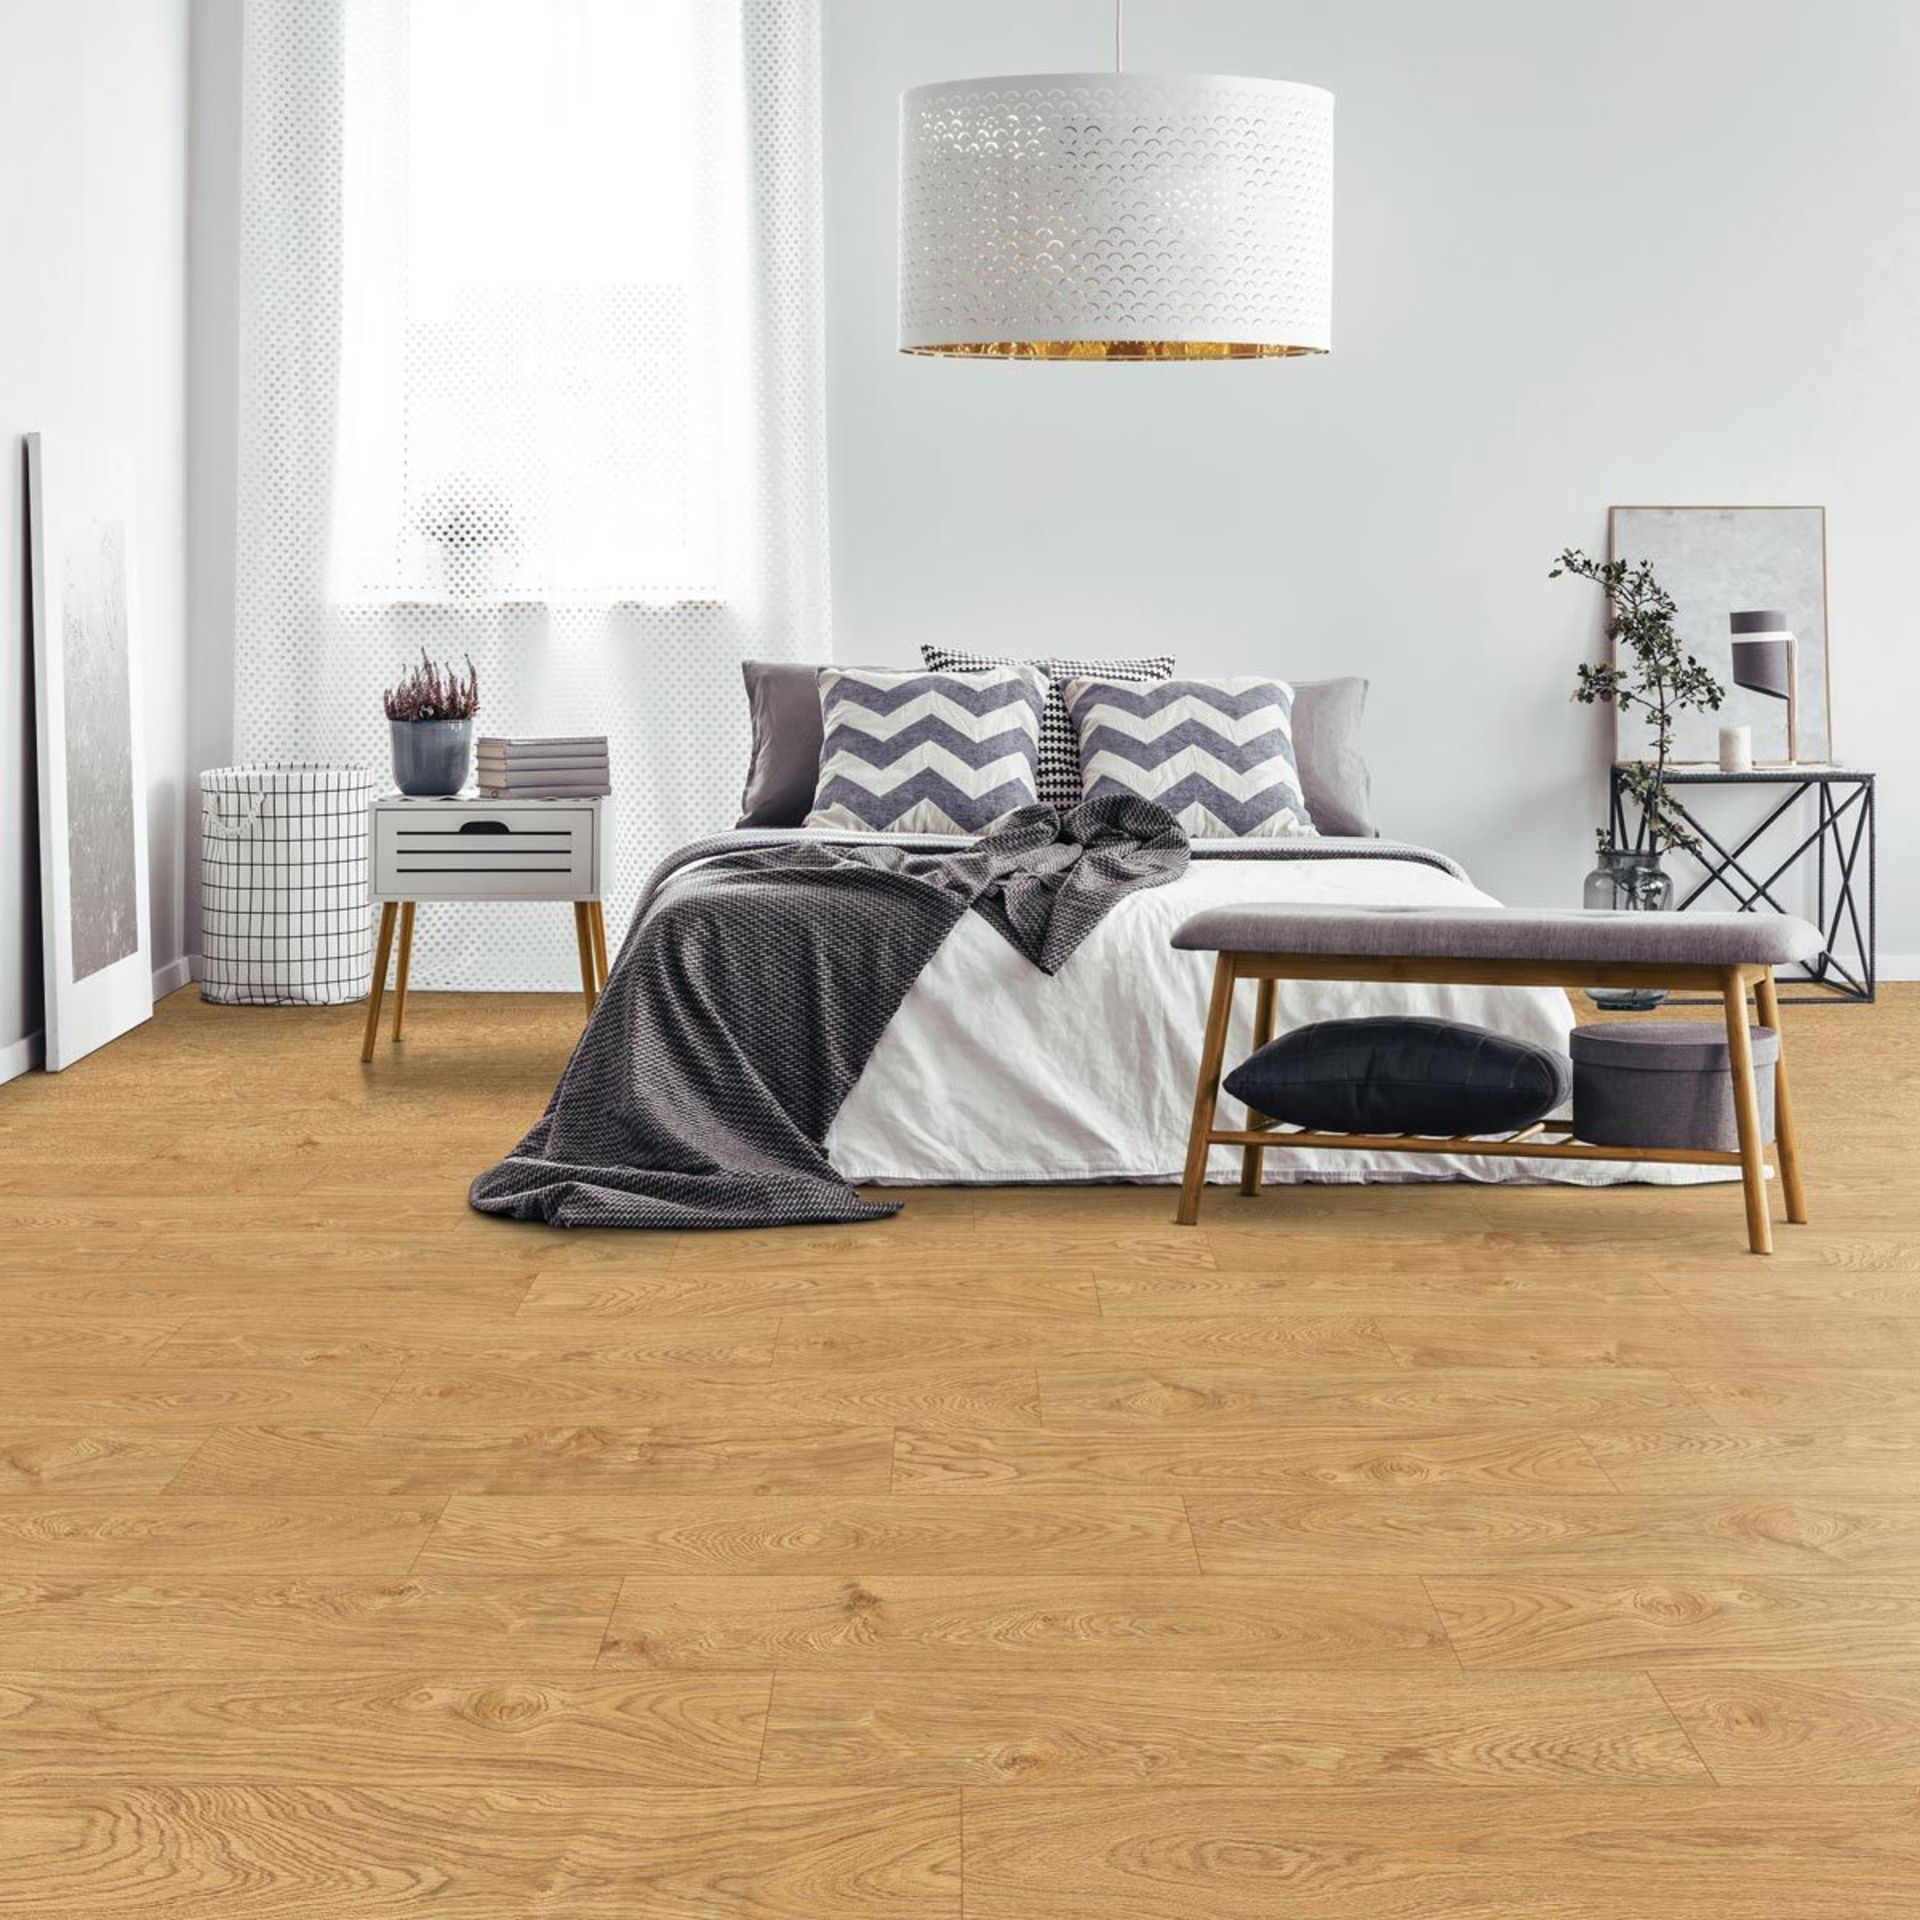 1 BOXED GOLDEN SELECT LAMINATE FLOORING IN TOASTE HONEY (COVERS APPROXIMATELY 1.162m2 PER BOX) RRP